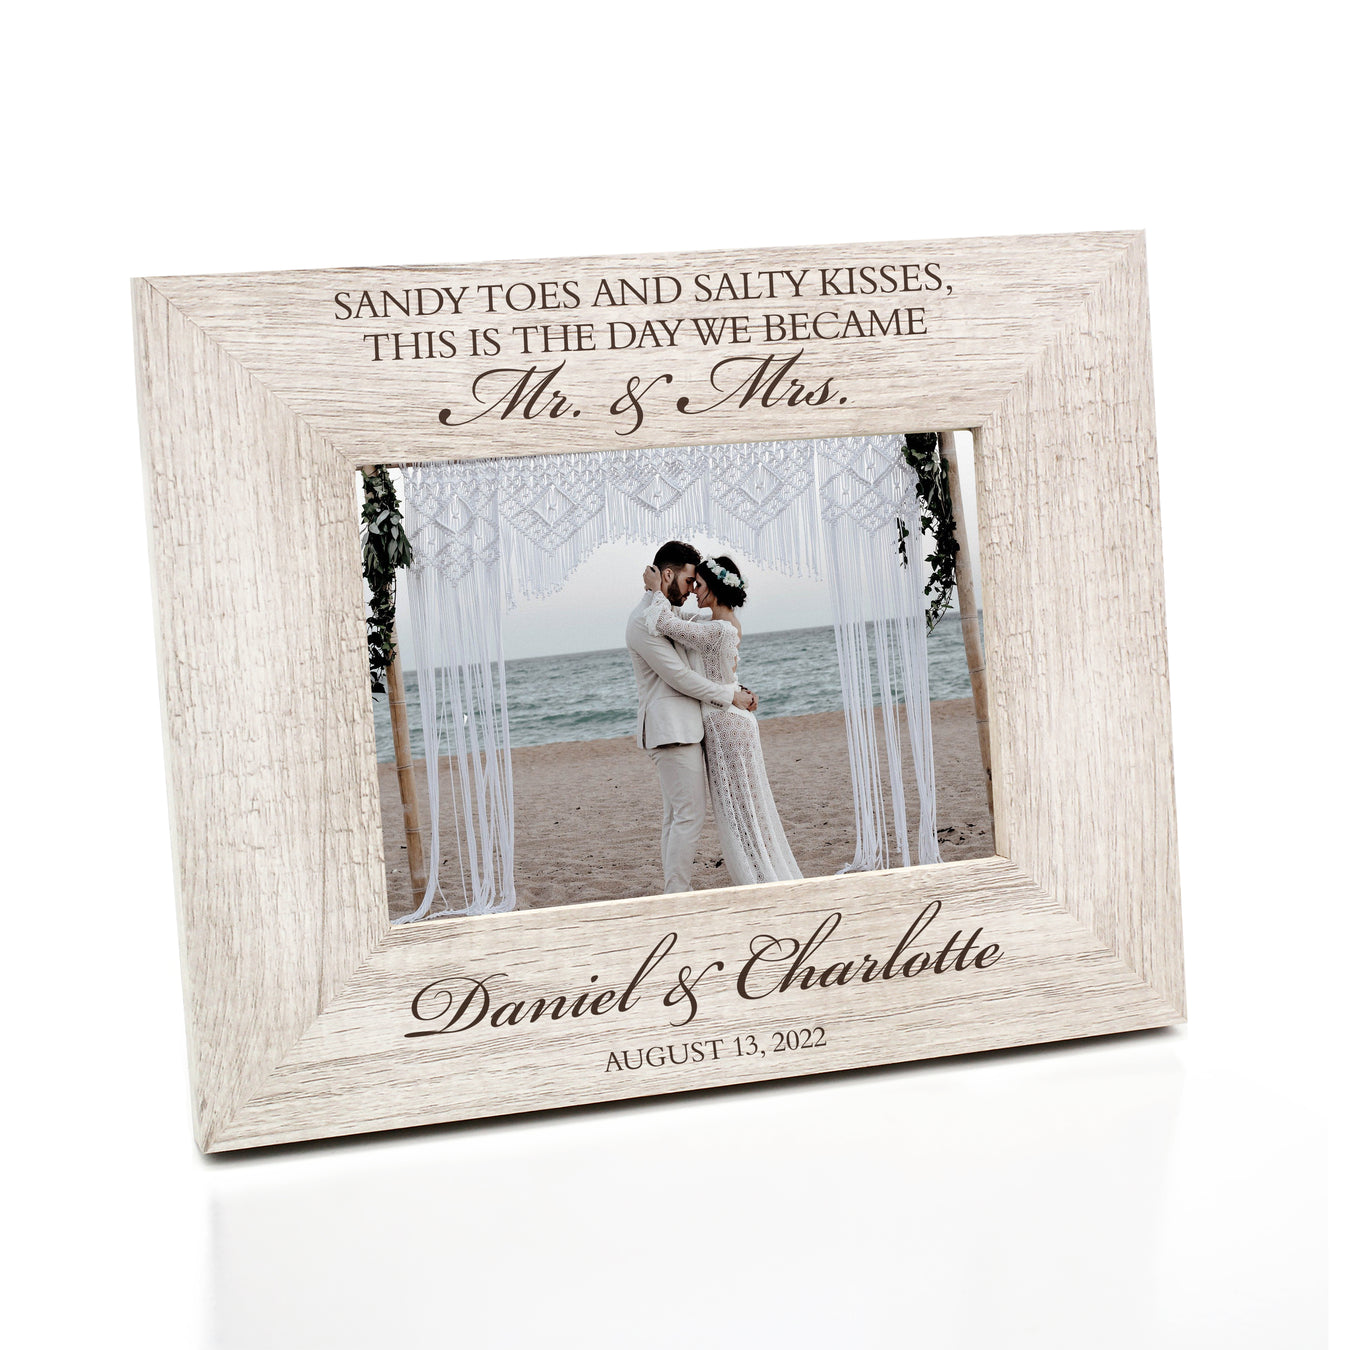 Personalized Wedding Picture Frames